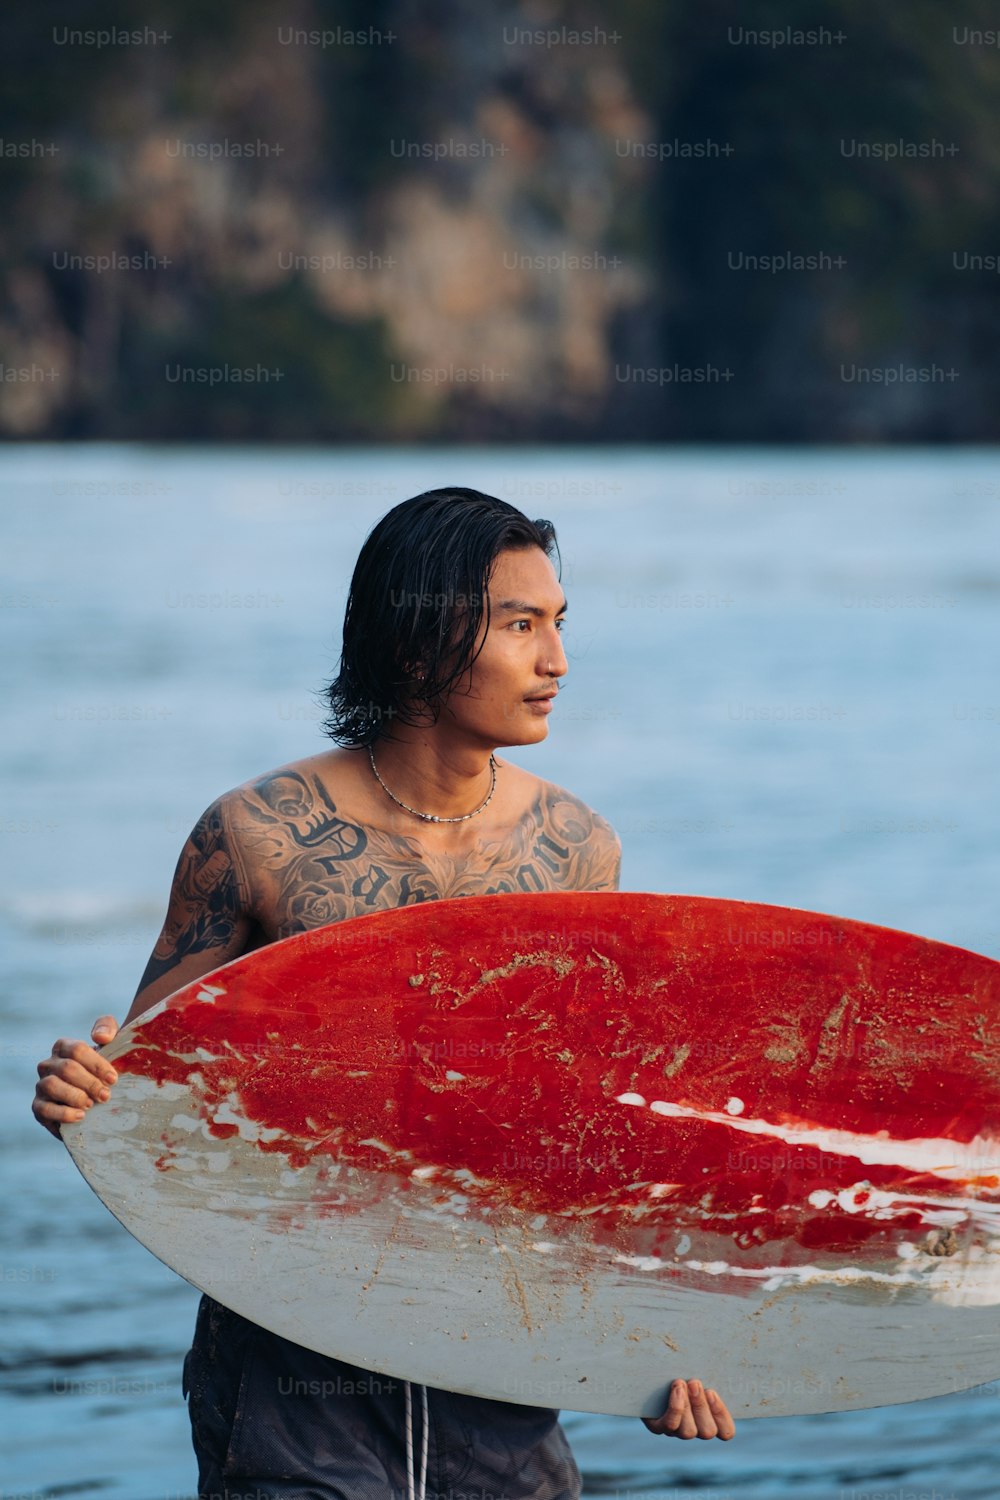 a man holding a red and white surfboard on top of a body of water